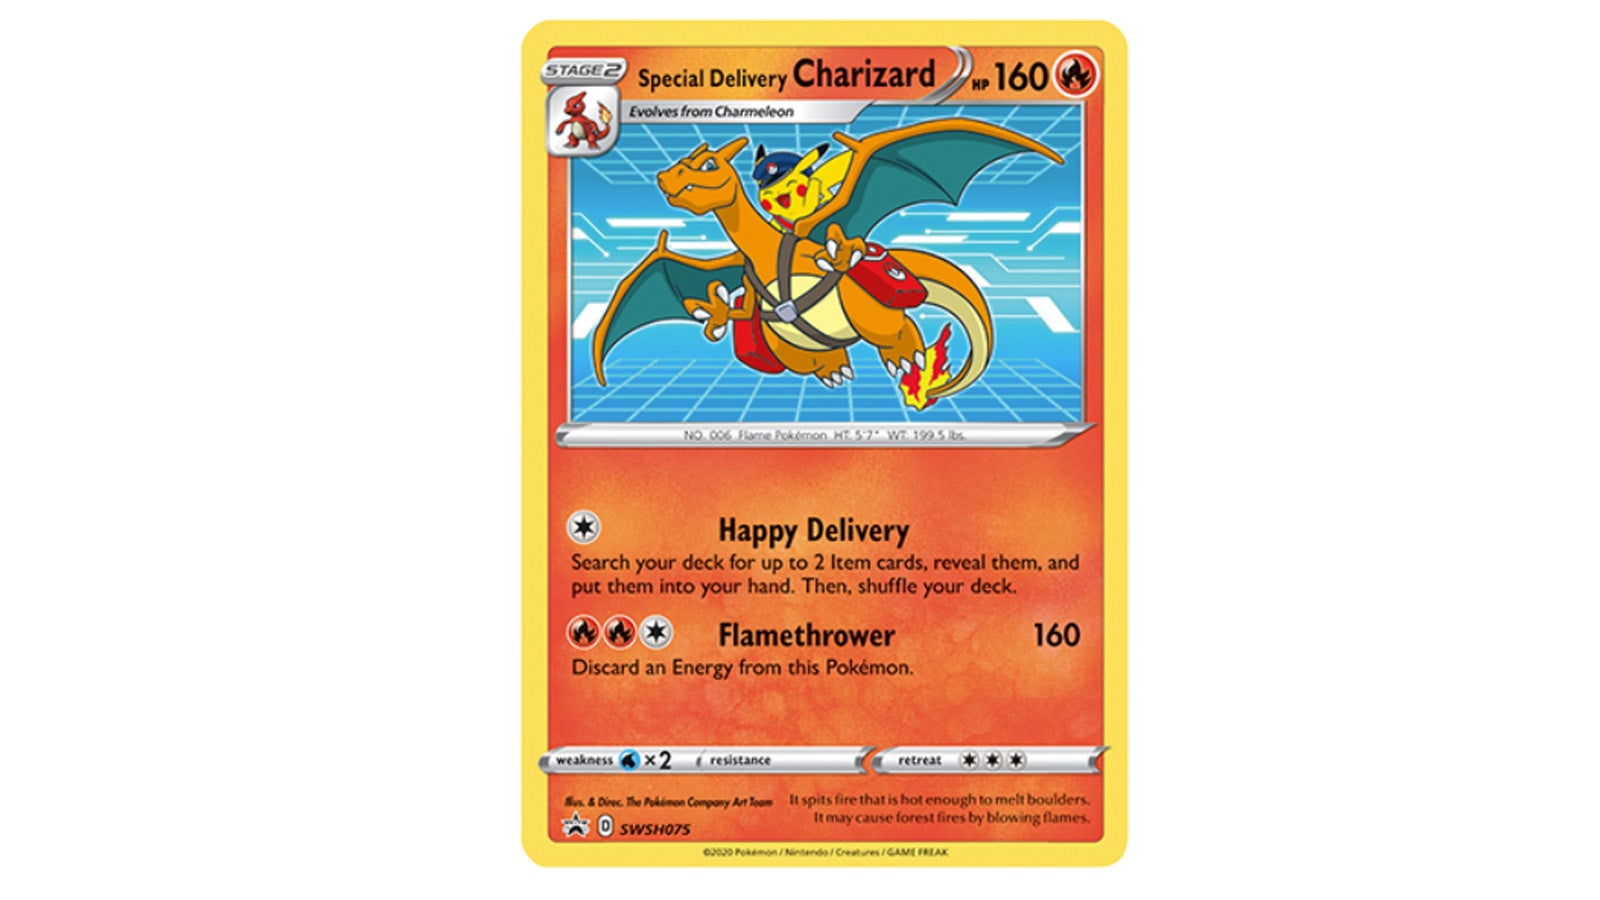 The Special Delivery Charizard promo card.